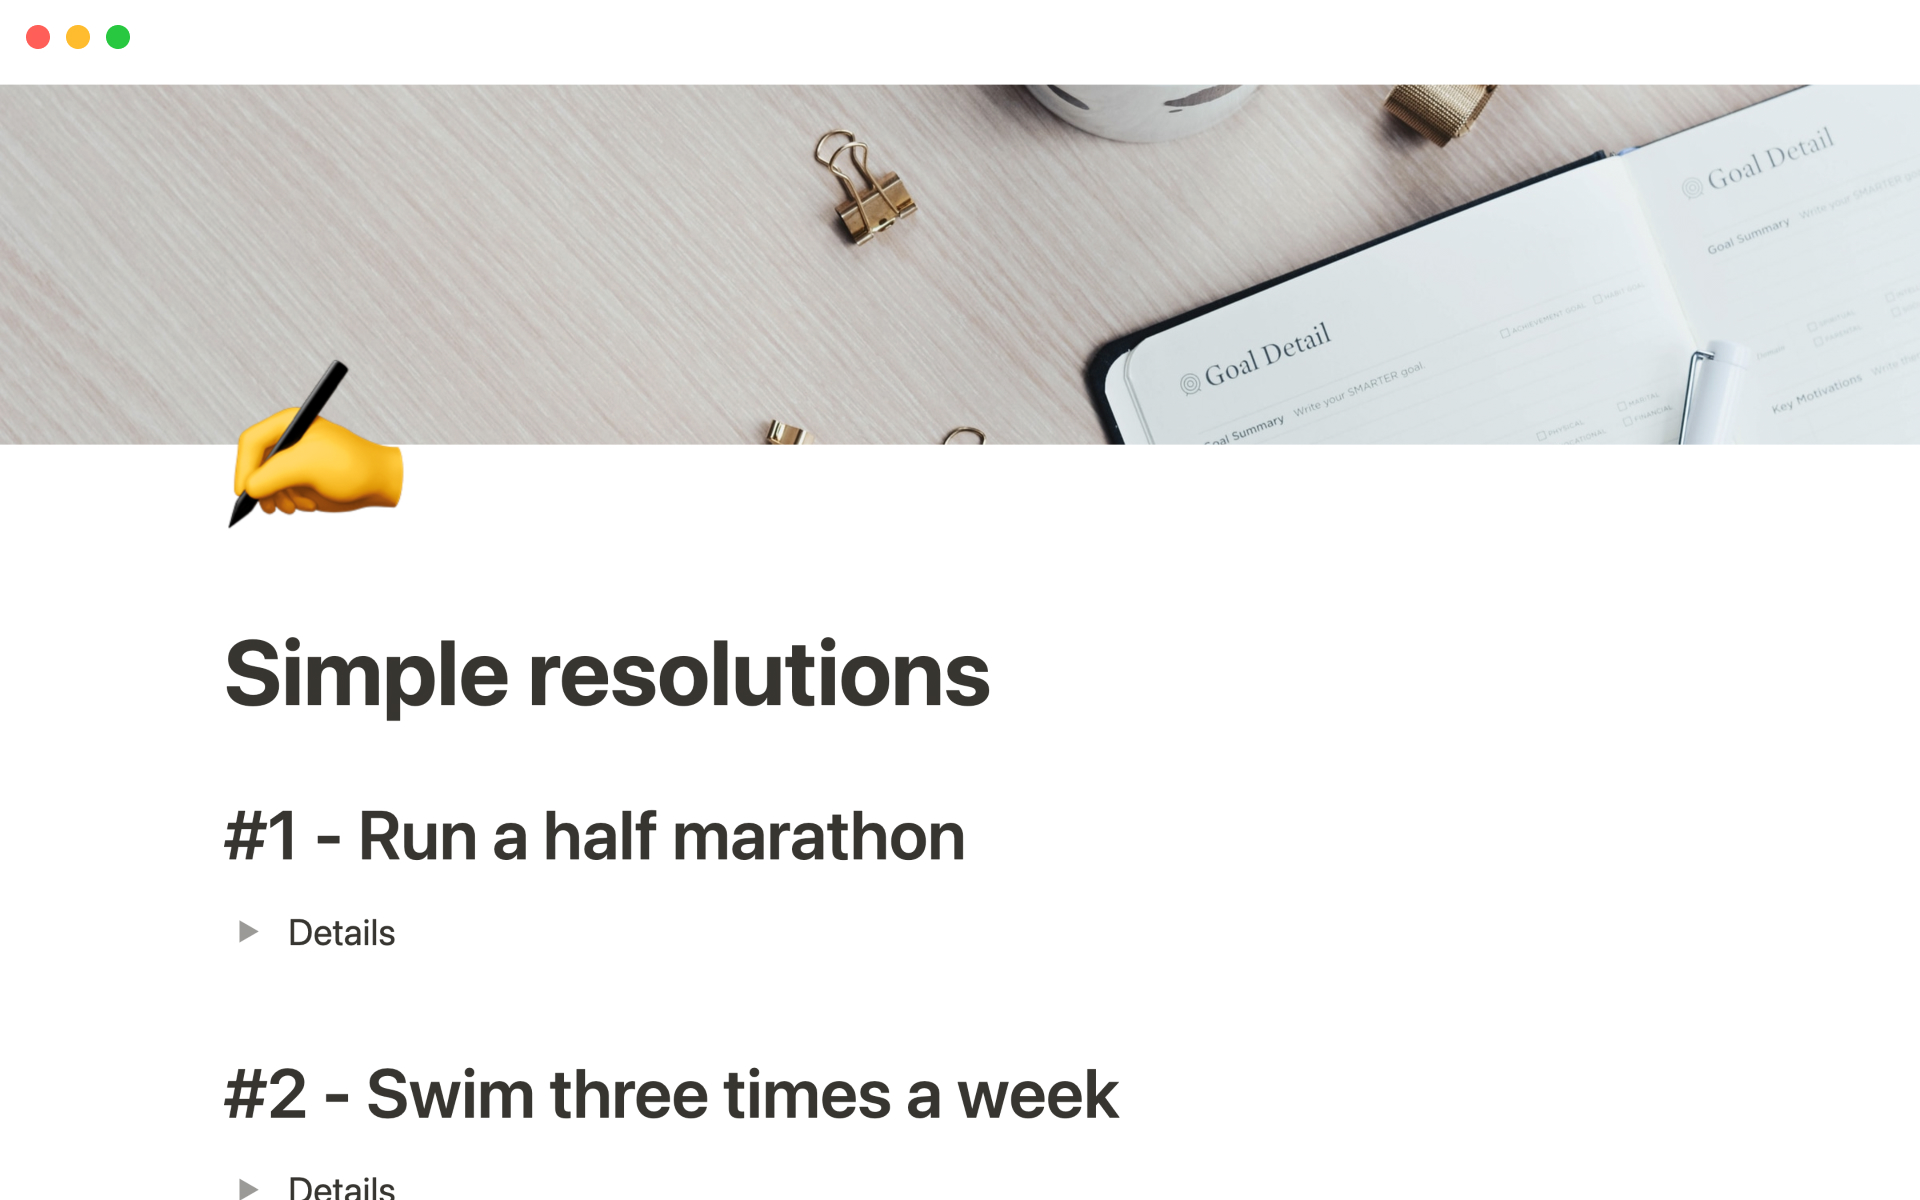 The desktop image for the Simple resolutions template